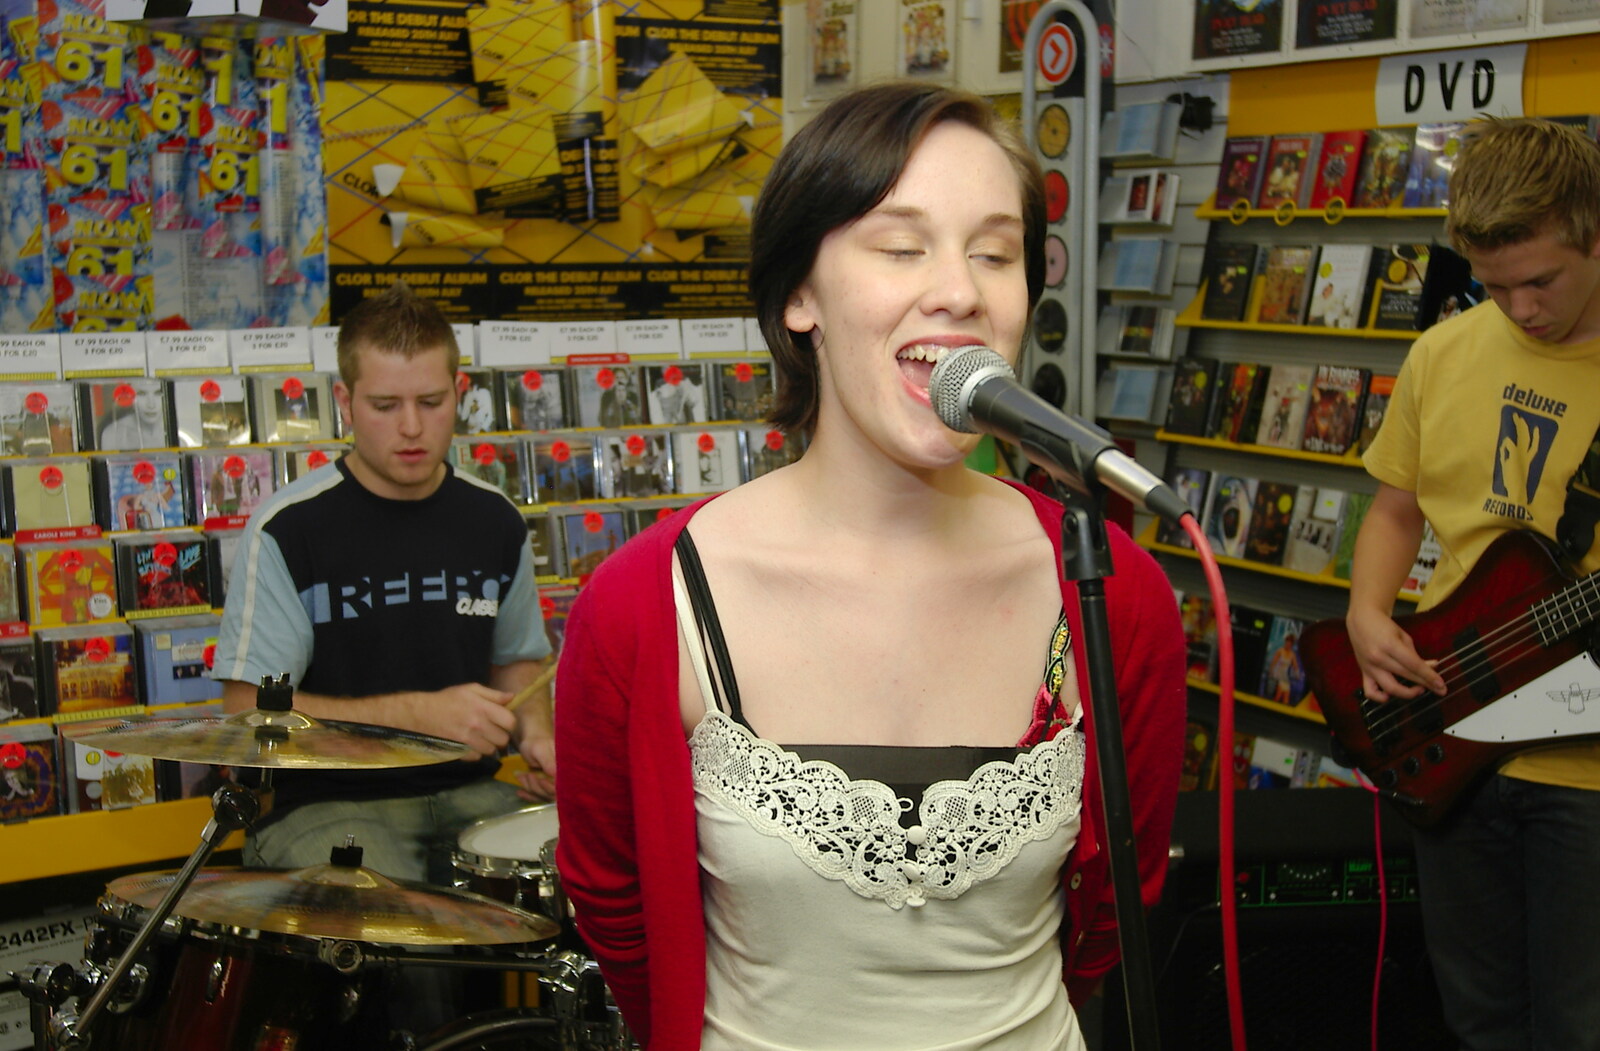 Alex Hill does an in-store set from Richard Panton's Van and Alex Hill at Revolution Records, Diss and Cambridge - 29th July 2005